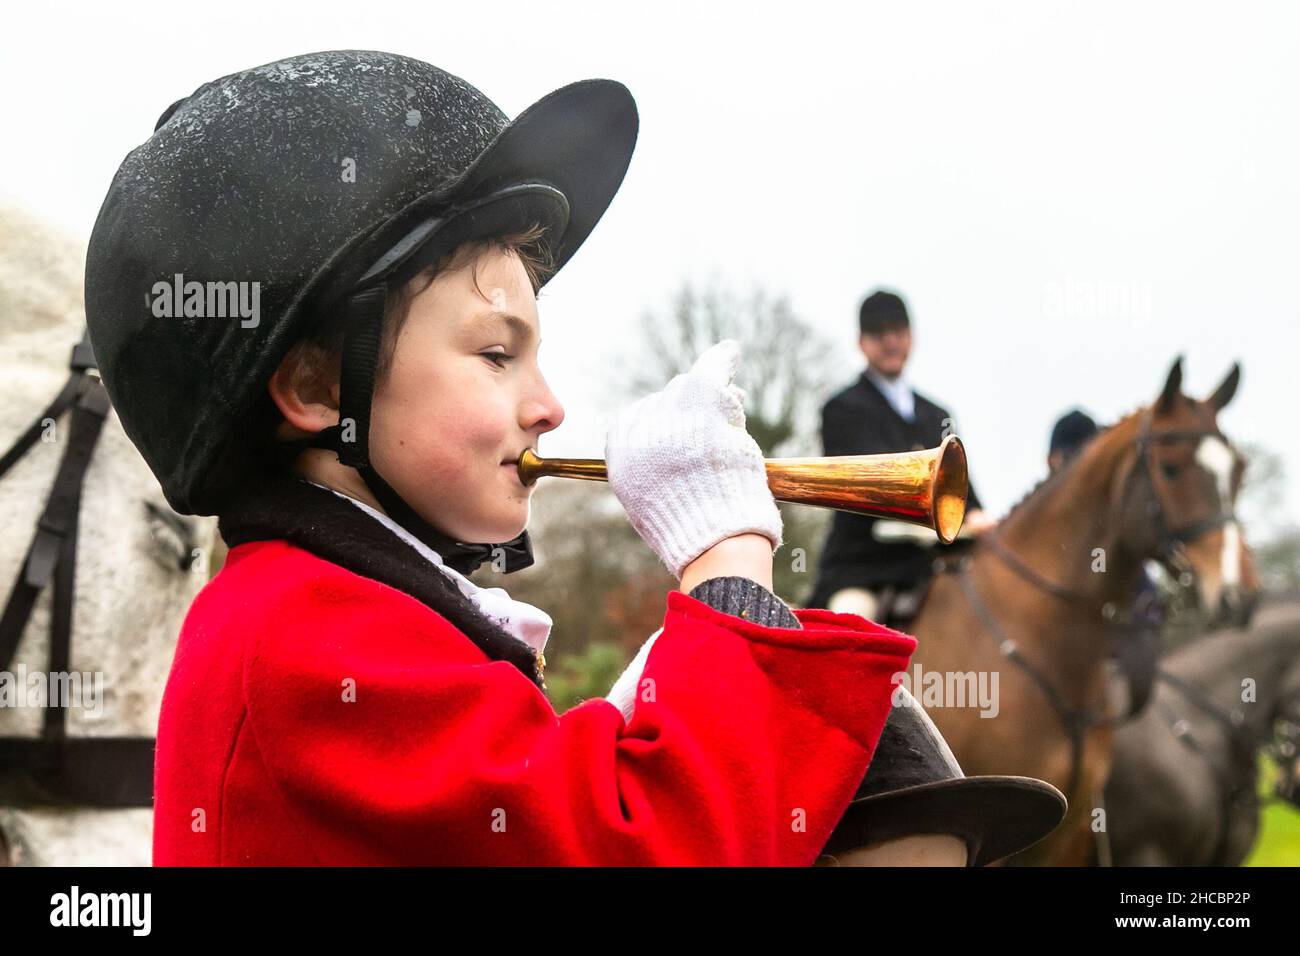 Hagley, Worcestershire, UK. 27th Dec, 2021. 8-year-old Henley Mills blows his horn at the first Albrighton and Woodland Hunt meet at Hagley Hall since the Coronavirus pandemic. The Albrighton and Woodland Hunt meet annually at Hagley Hall in Worcestershire. Credit: Peter Lopeman/Alamy Live News Stock Photo